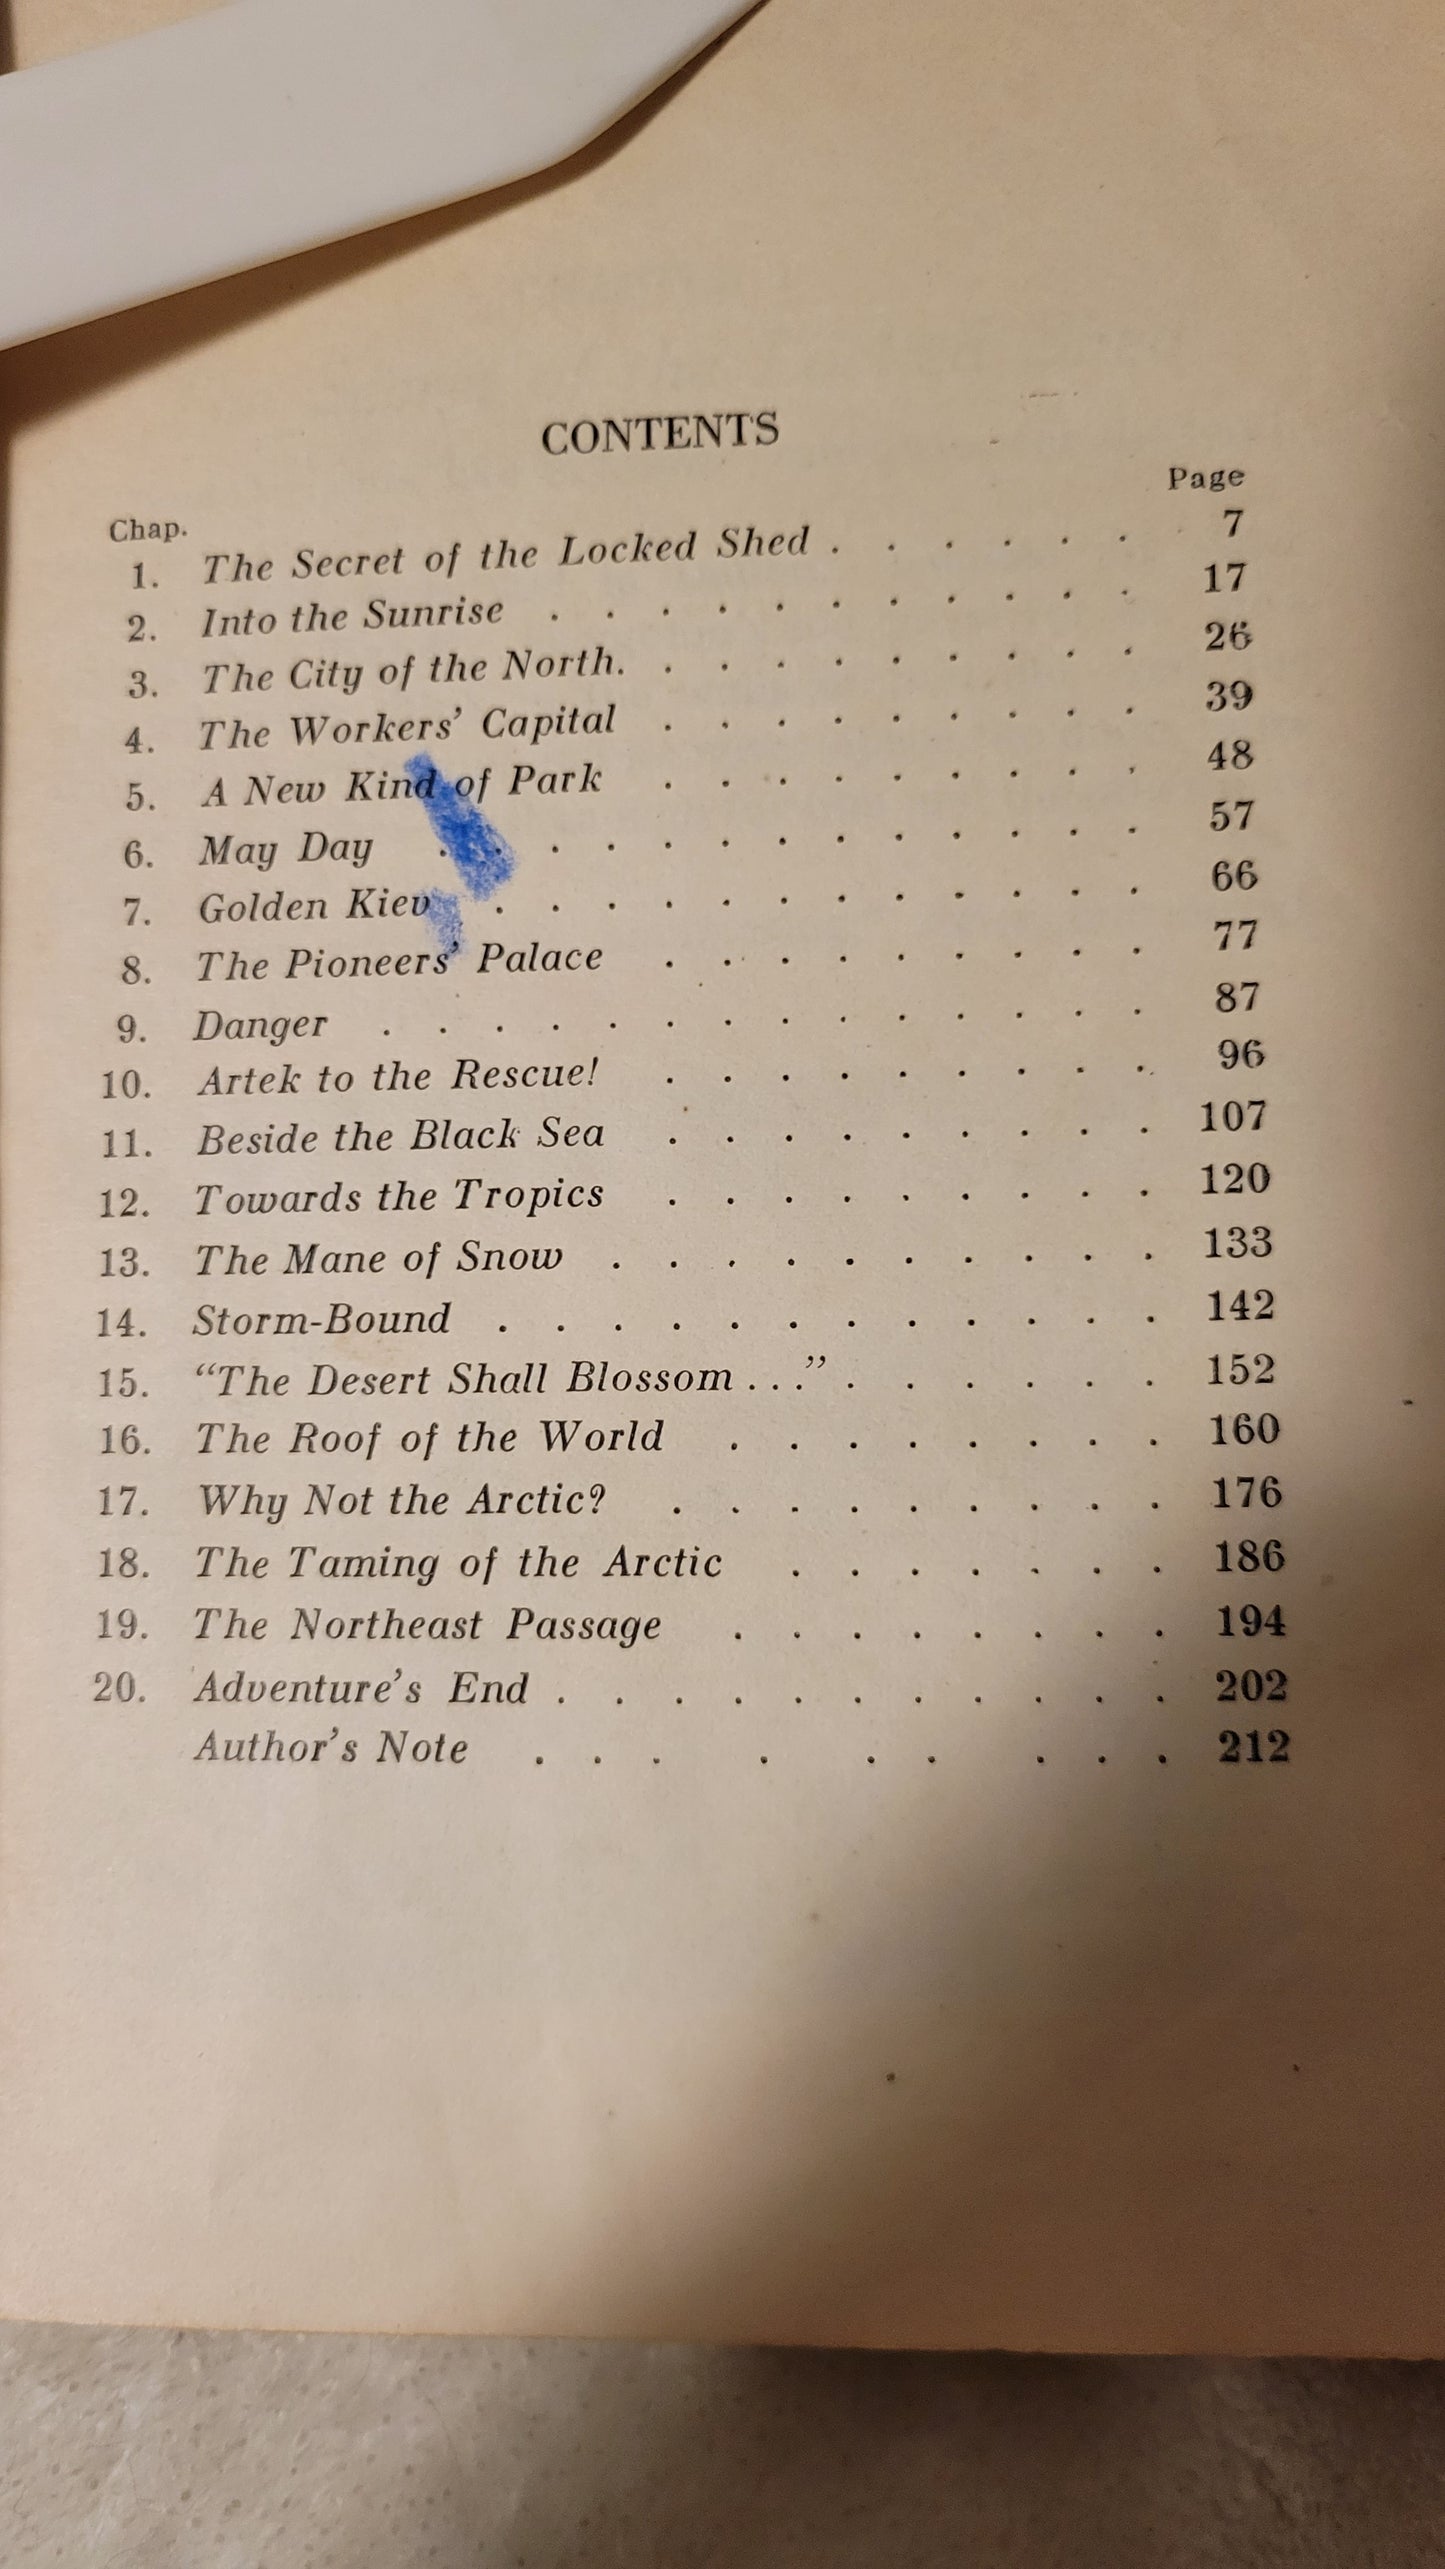 Vintage book for sale from the USSR, “Red Comet: A Tale of Travel in the USSR" written by British author Geoffrey Trease, published by International Publishers, 1937. View of table of contents